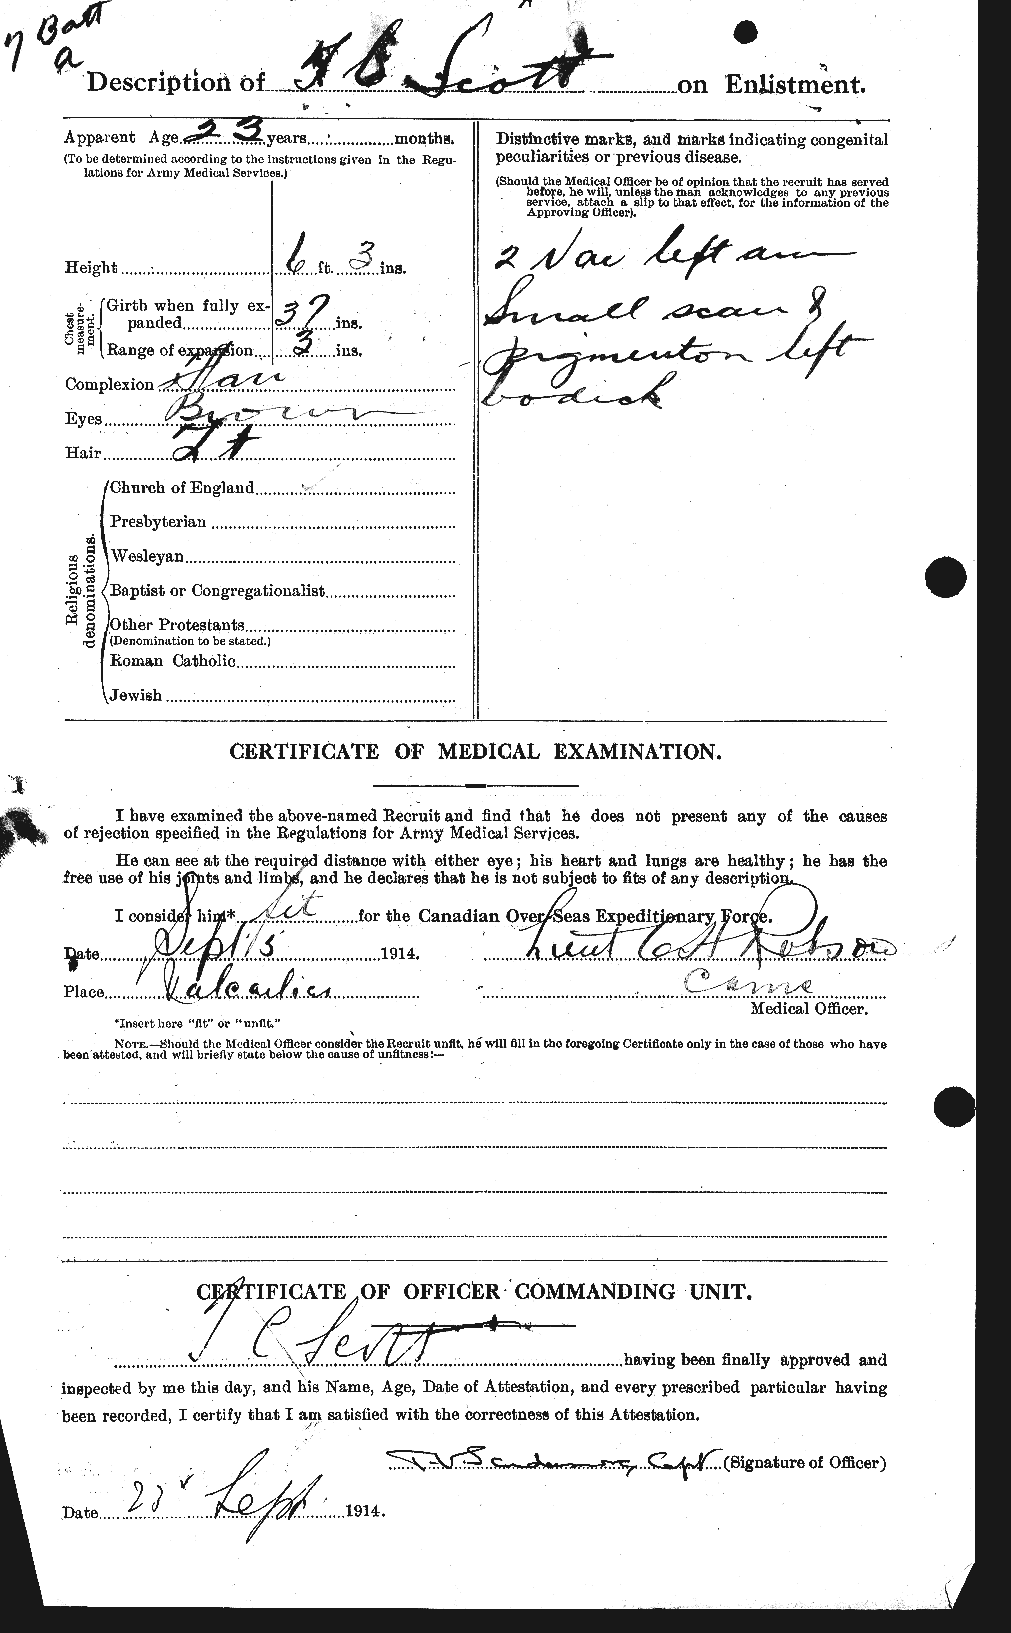 Personnel Records of the First World War - CEF 088521b